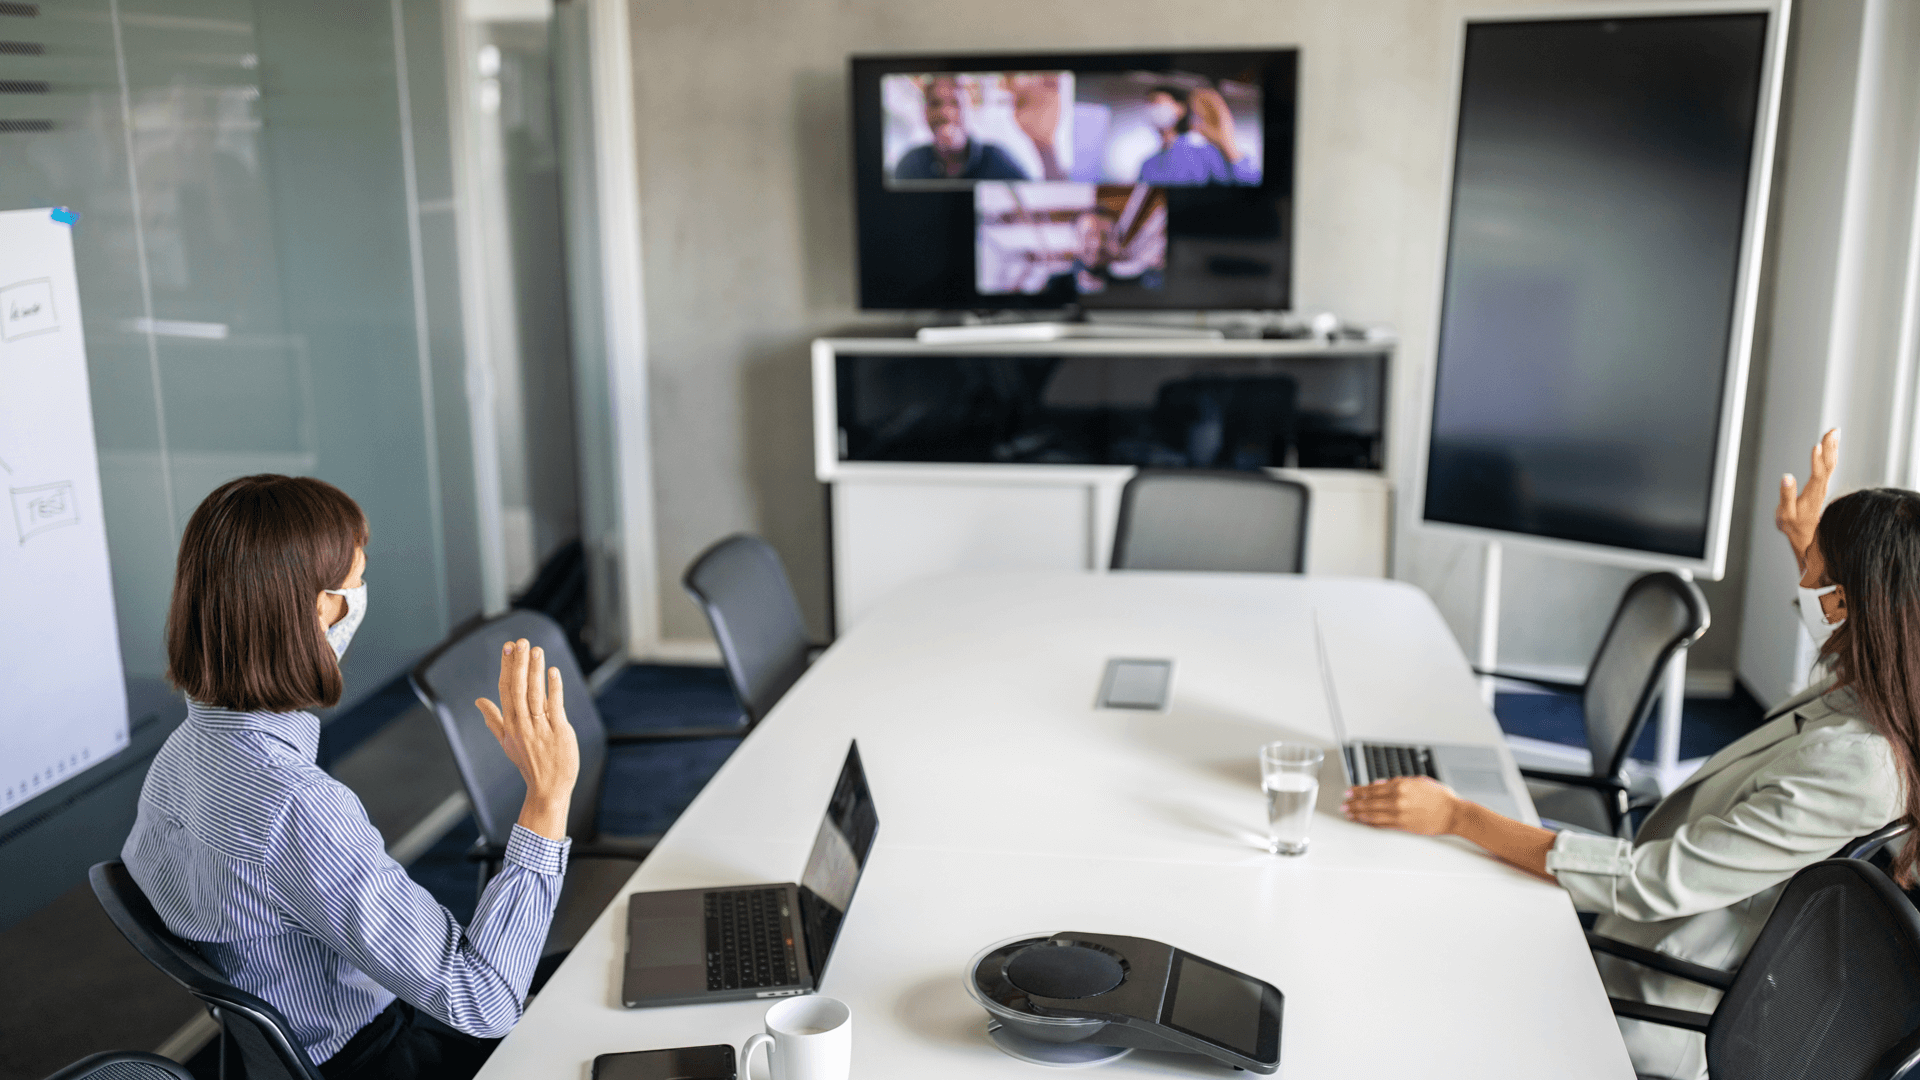 Hybrid virtual and in-person meeting in a boardroom and on TV